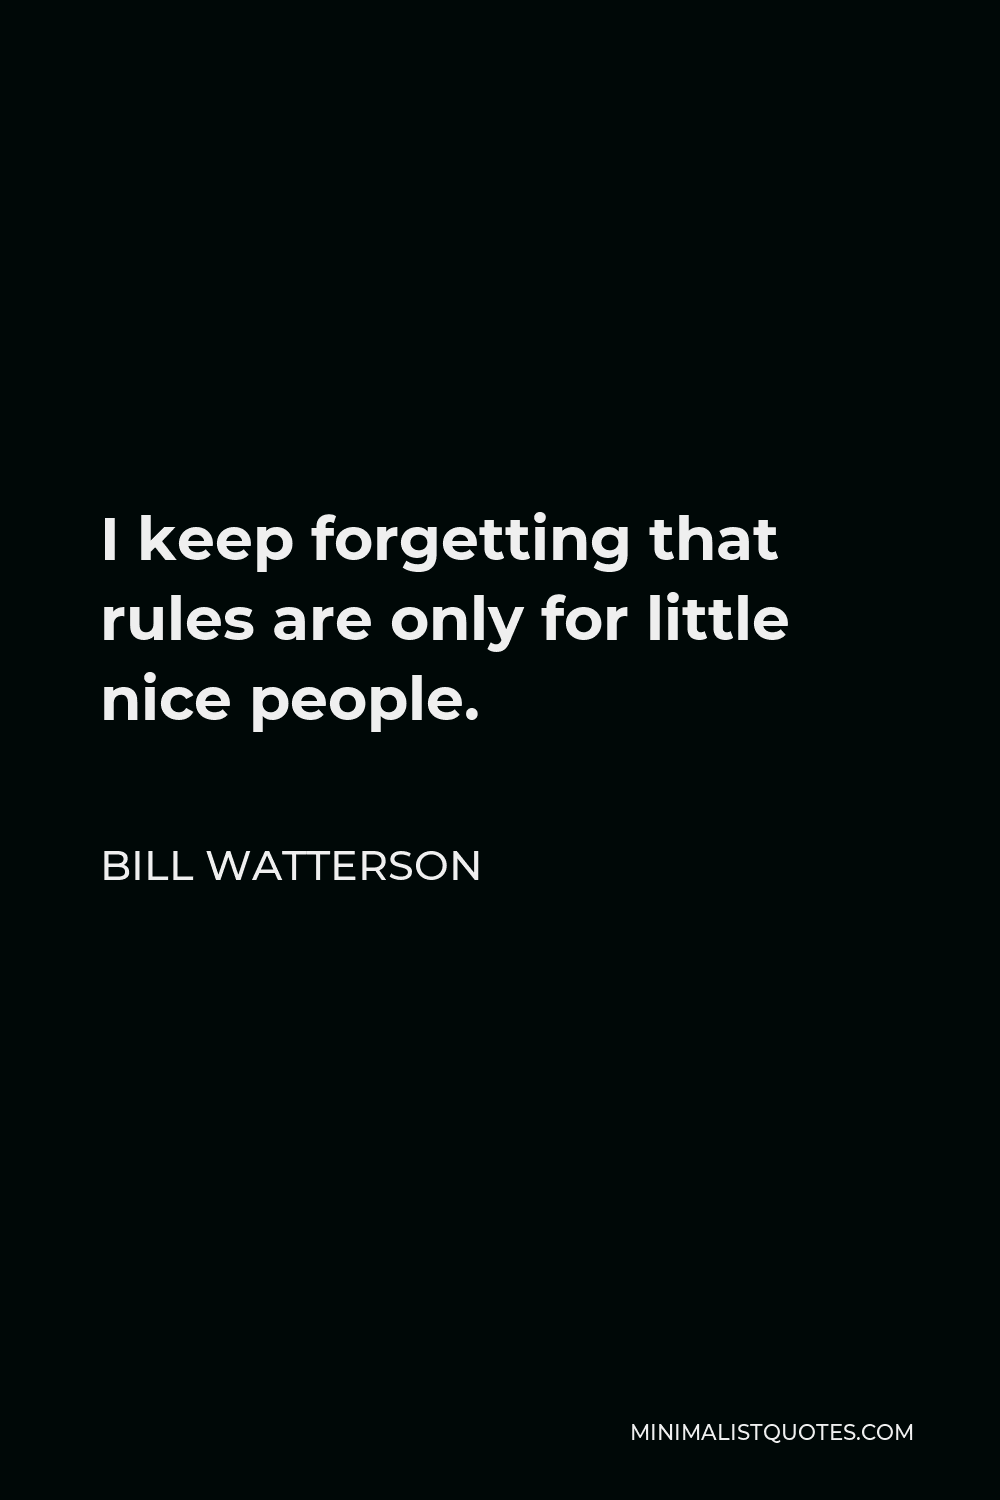 Bill Watterson Quote - I keep forgetting that rules are only for little nice people.